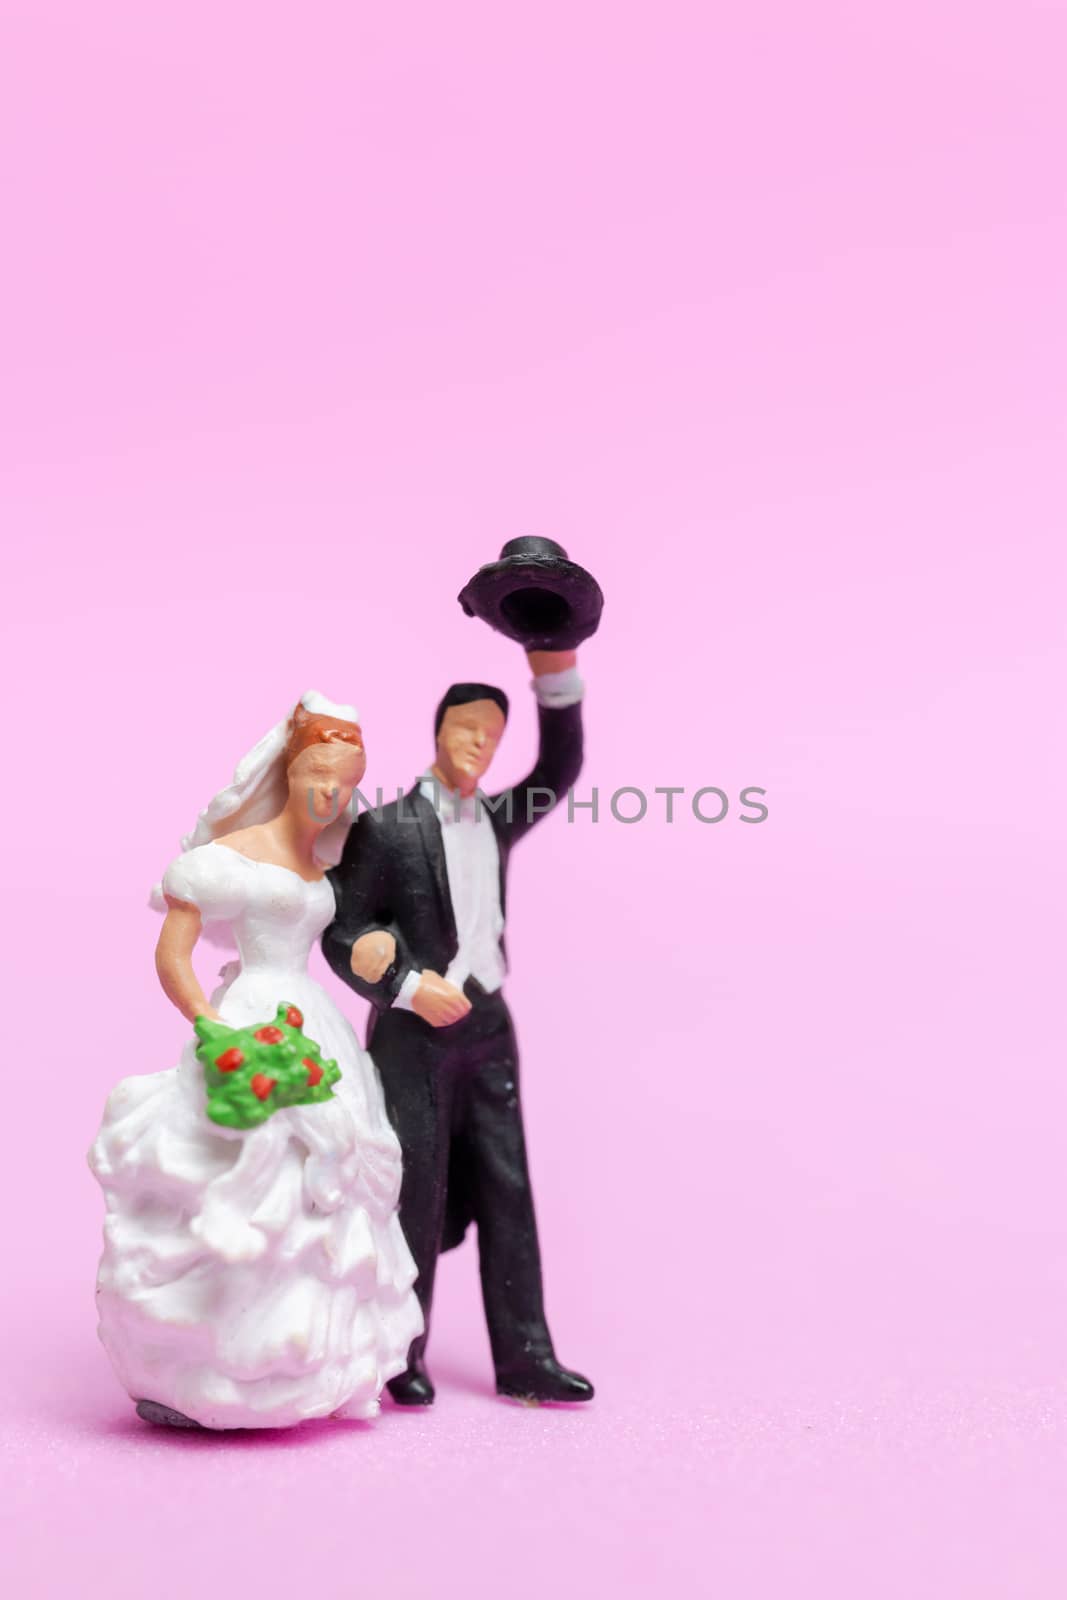 Miniature people wedding , bride and groom couple on pink  background , Valentine's Day concept